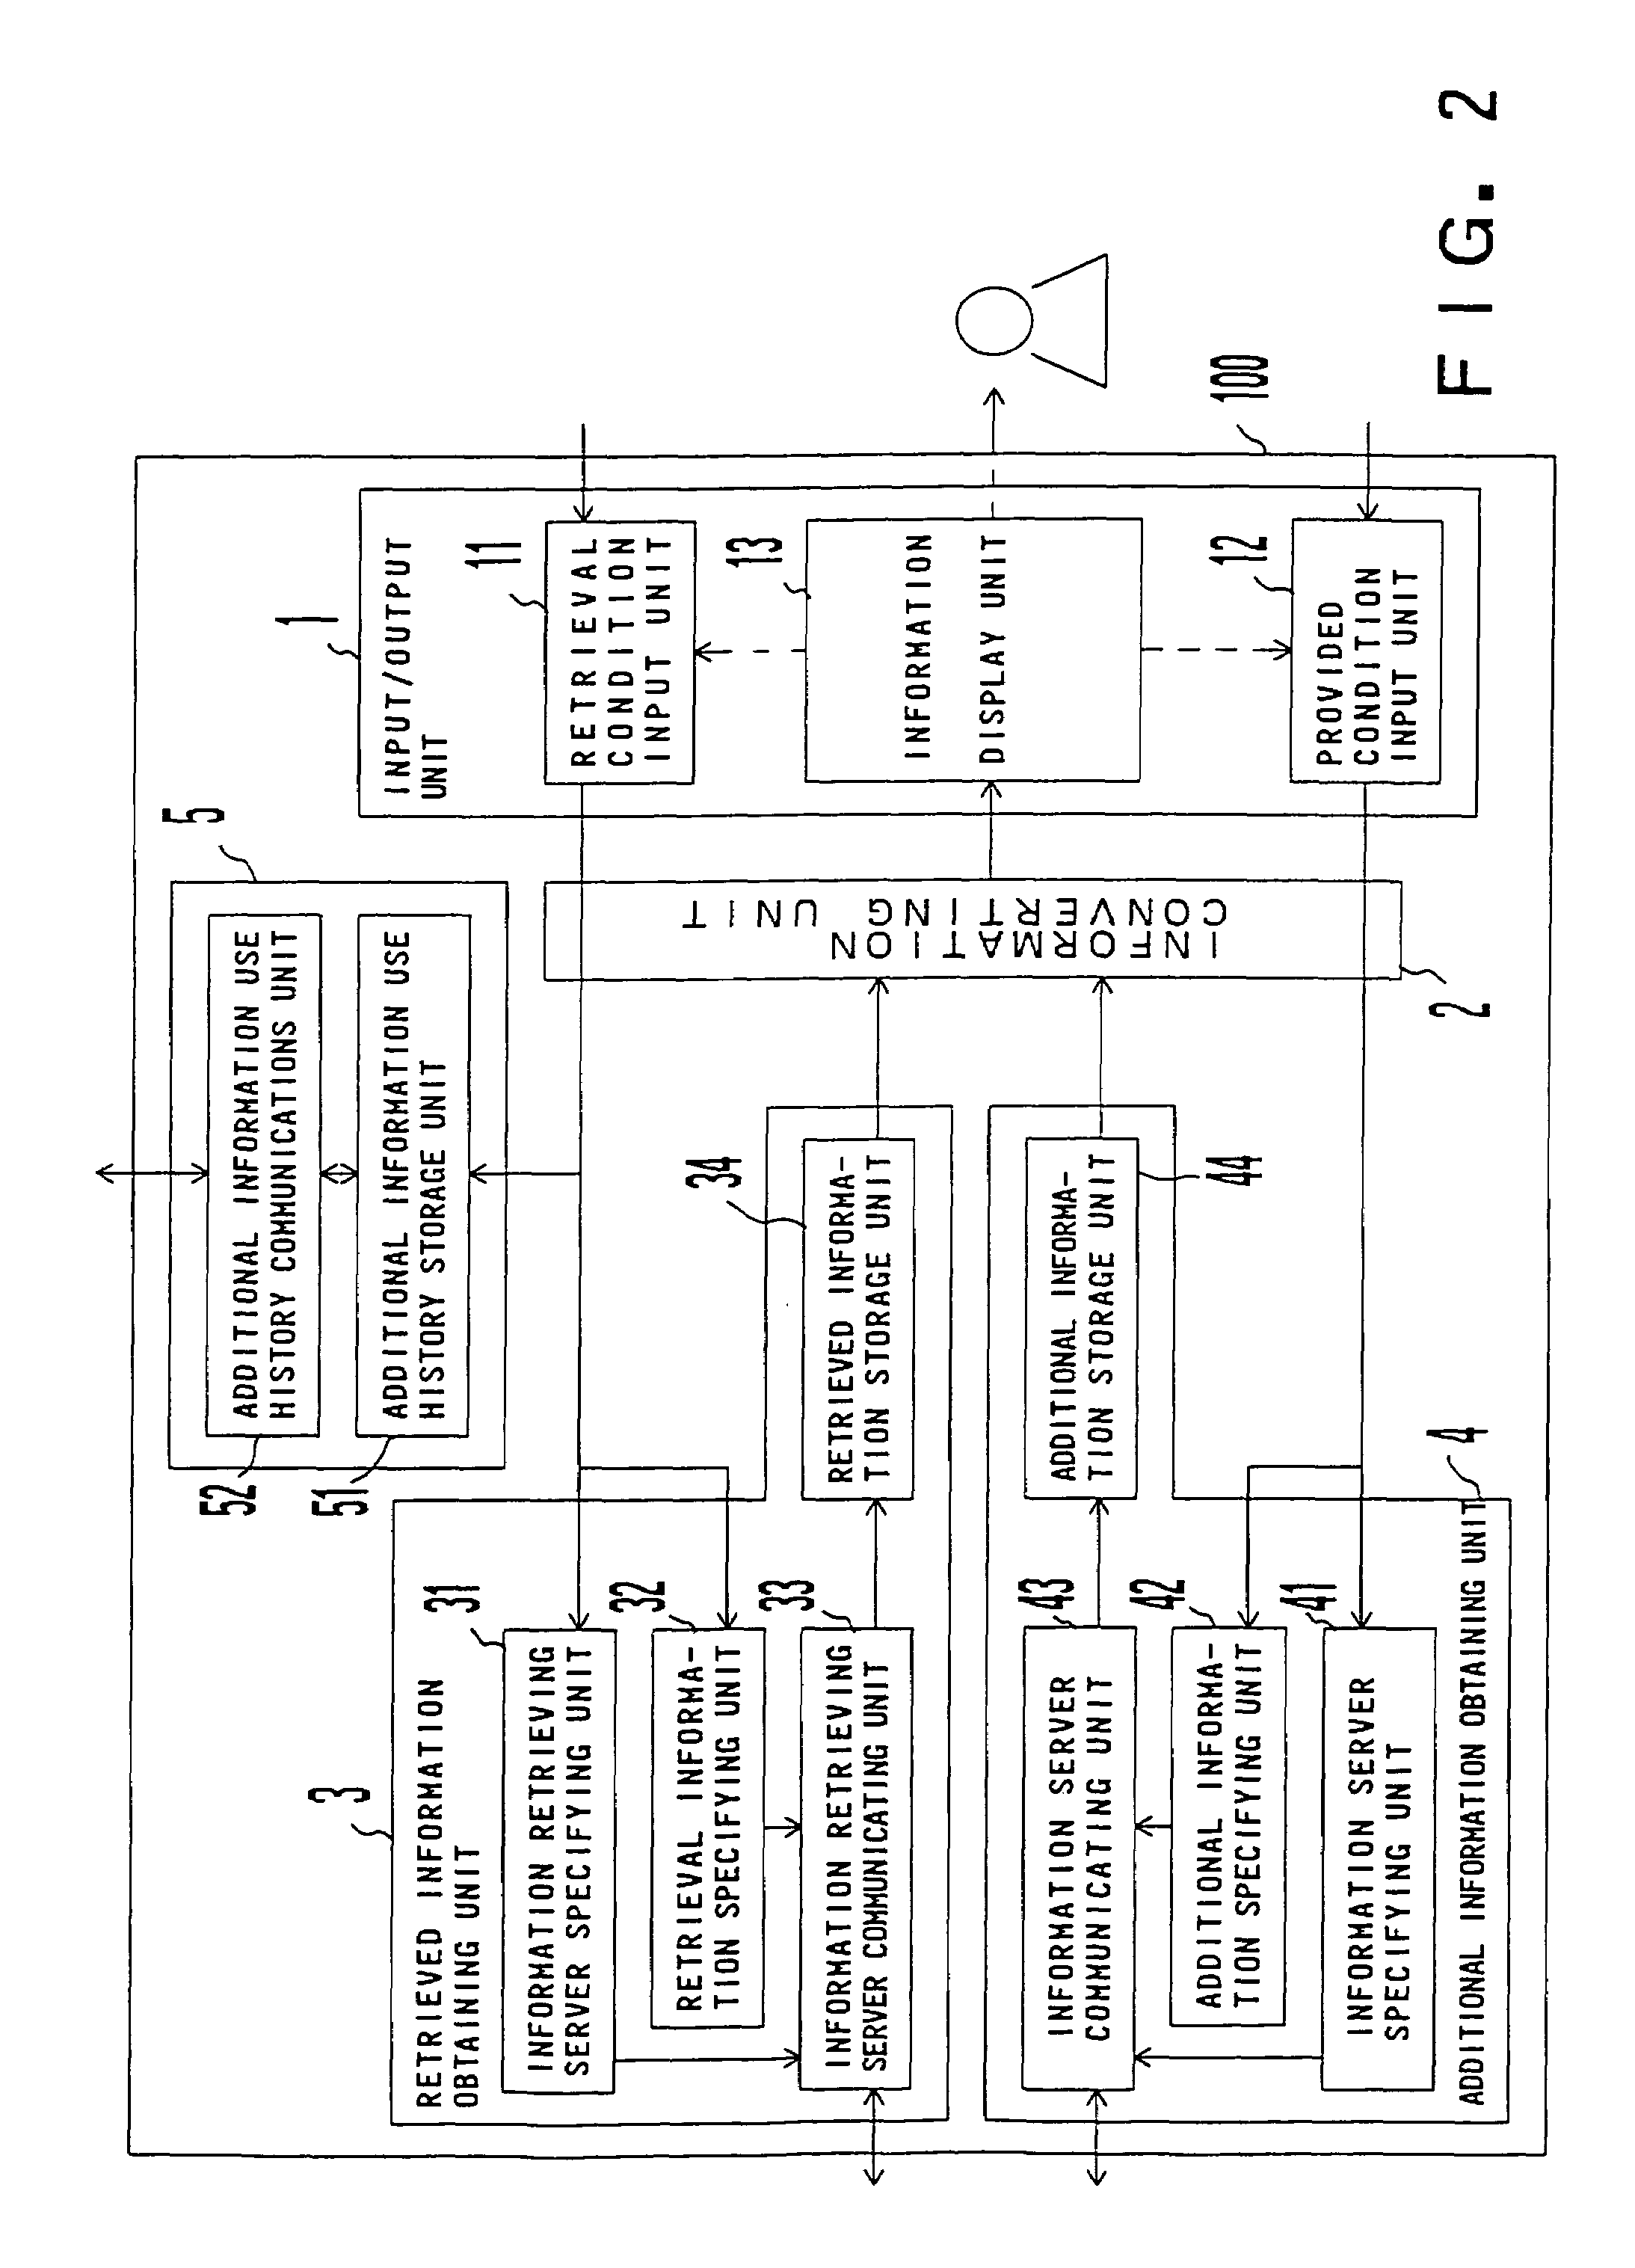 Information retrieving apparatus and system for displaying information with incorporated advertising information